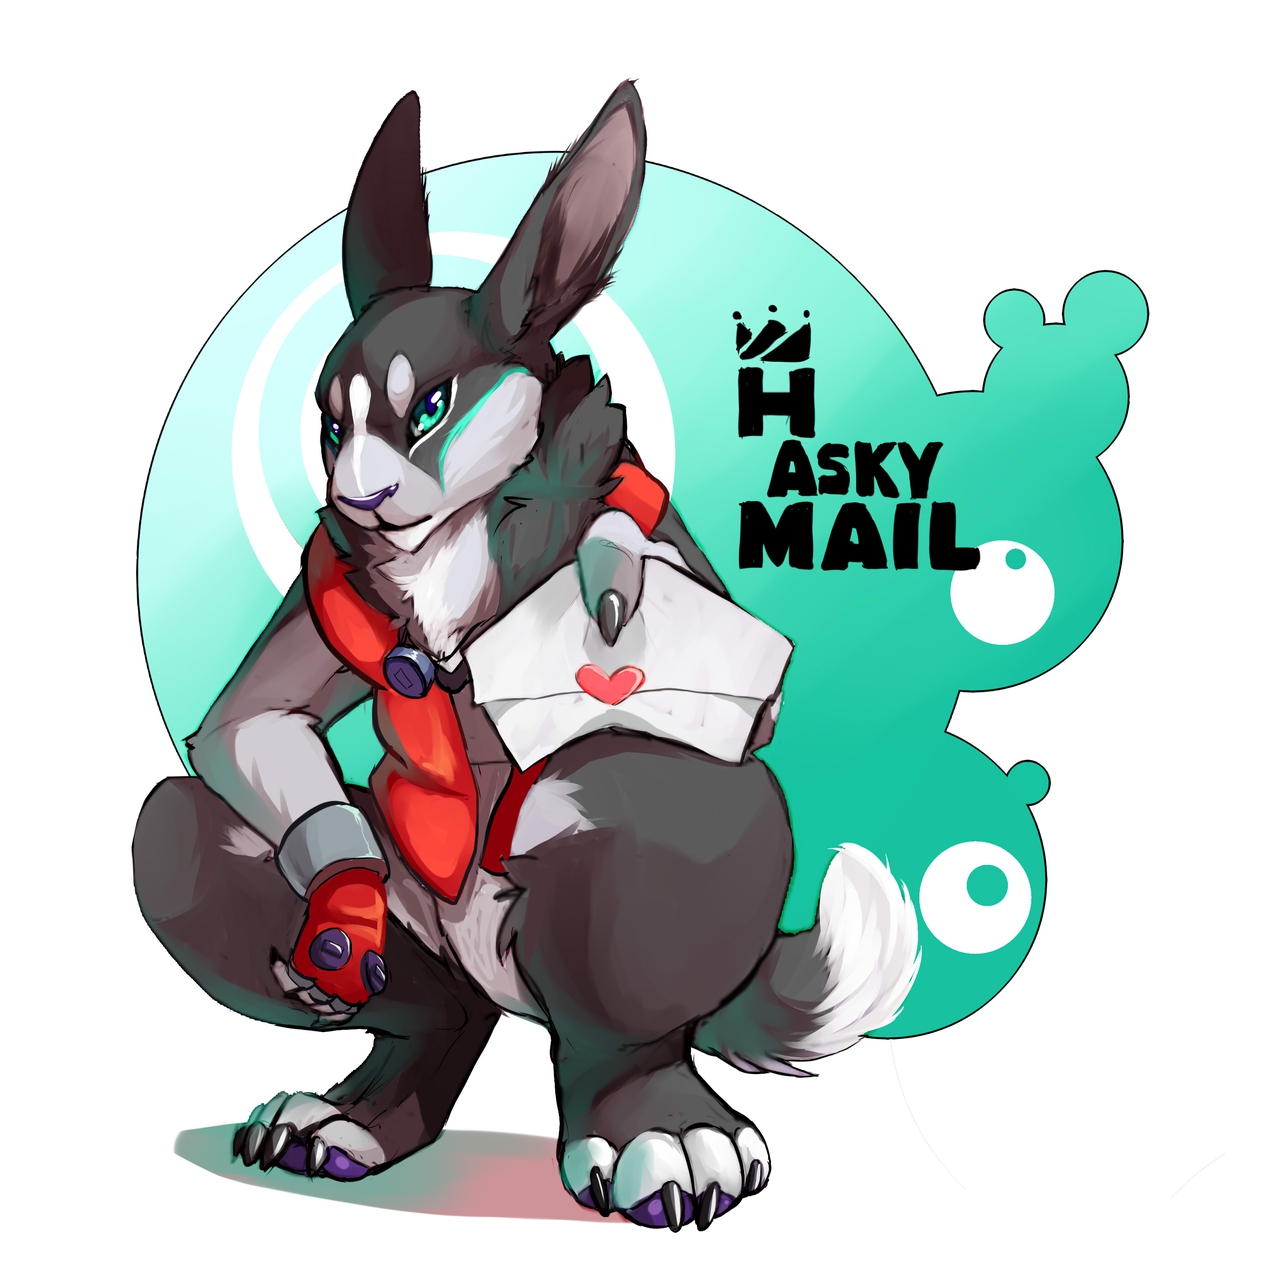 Hasky Mail for you!